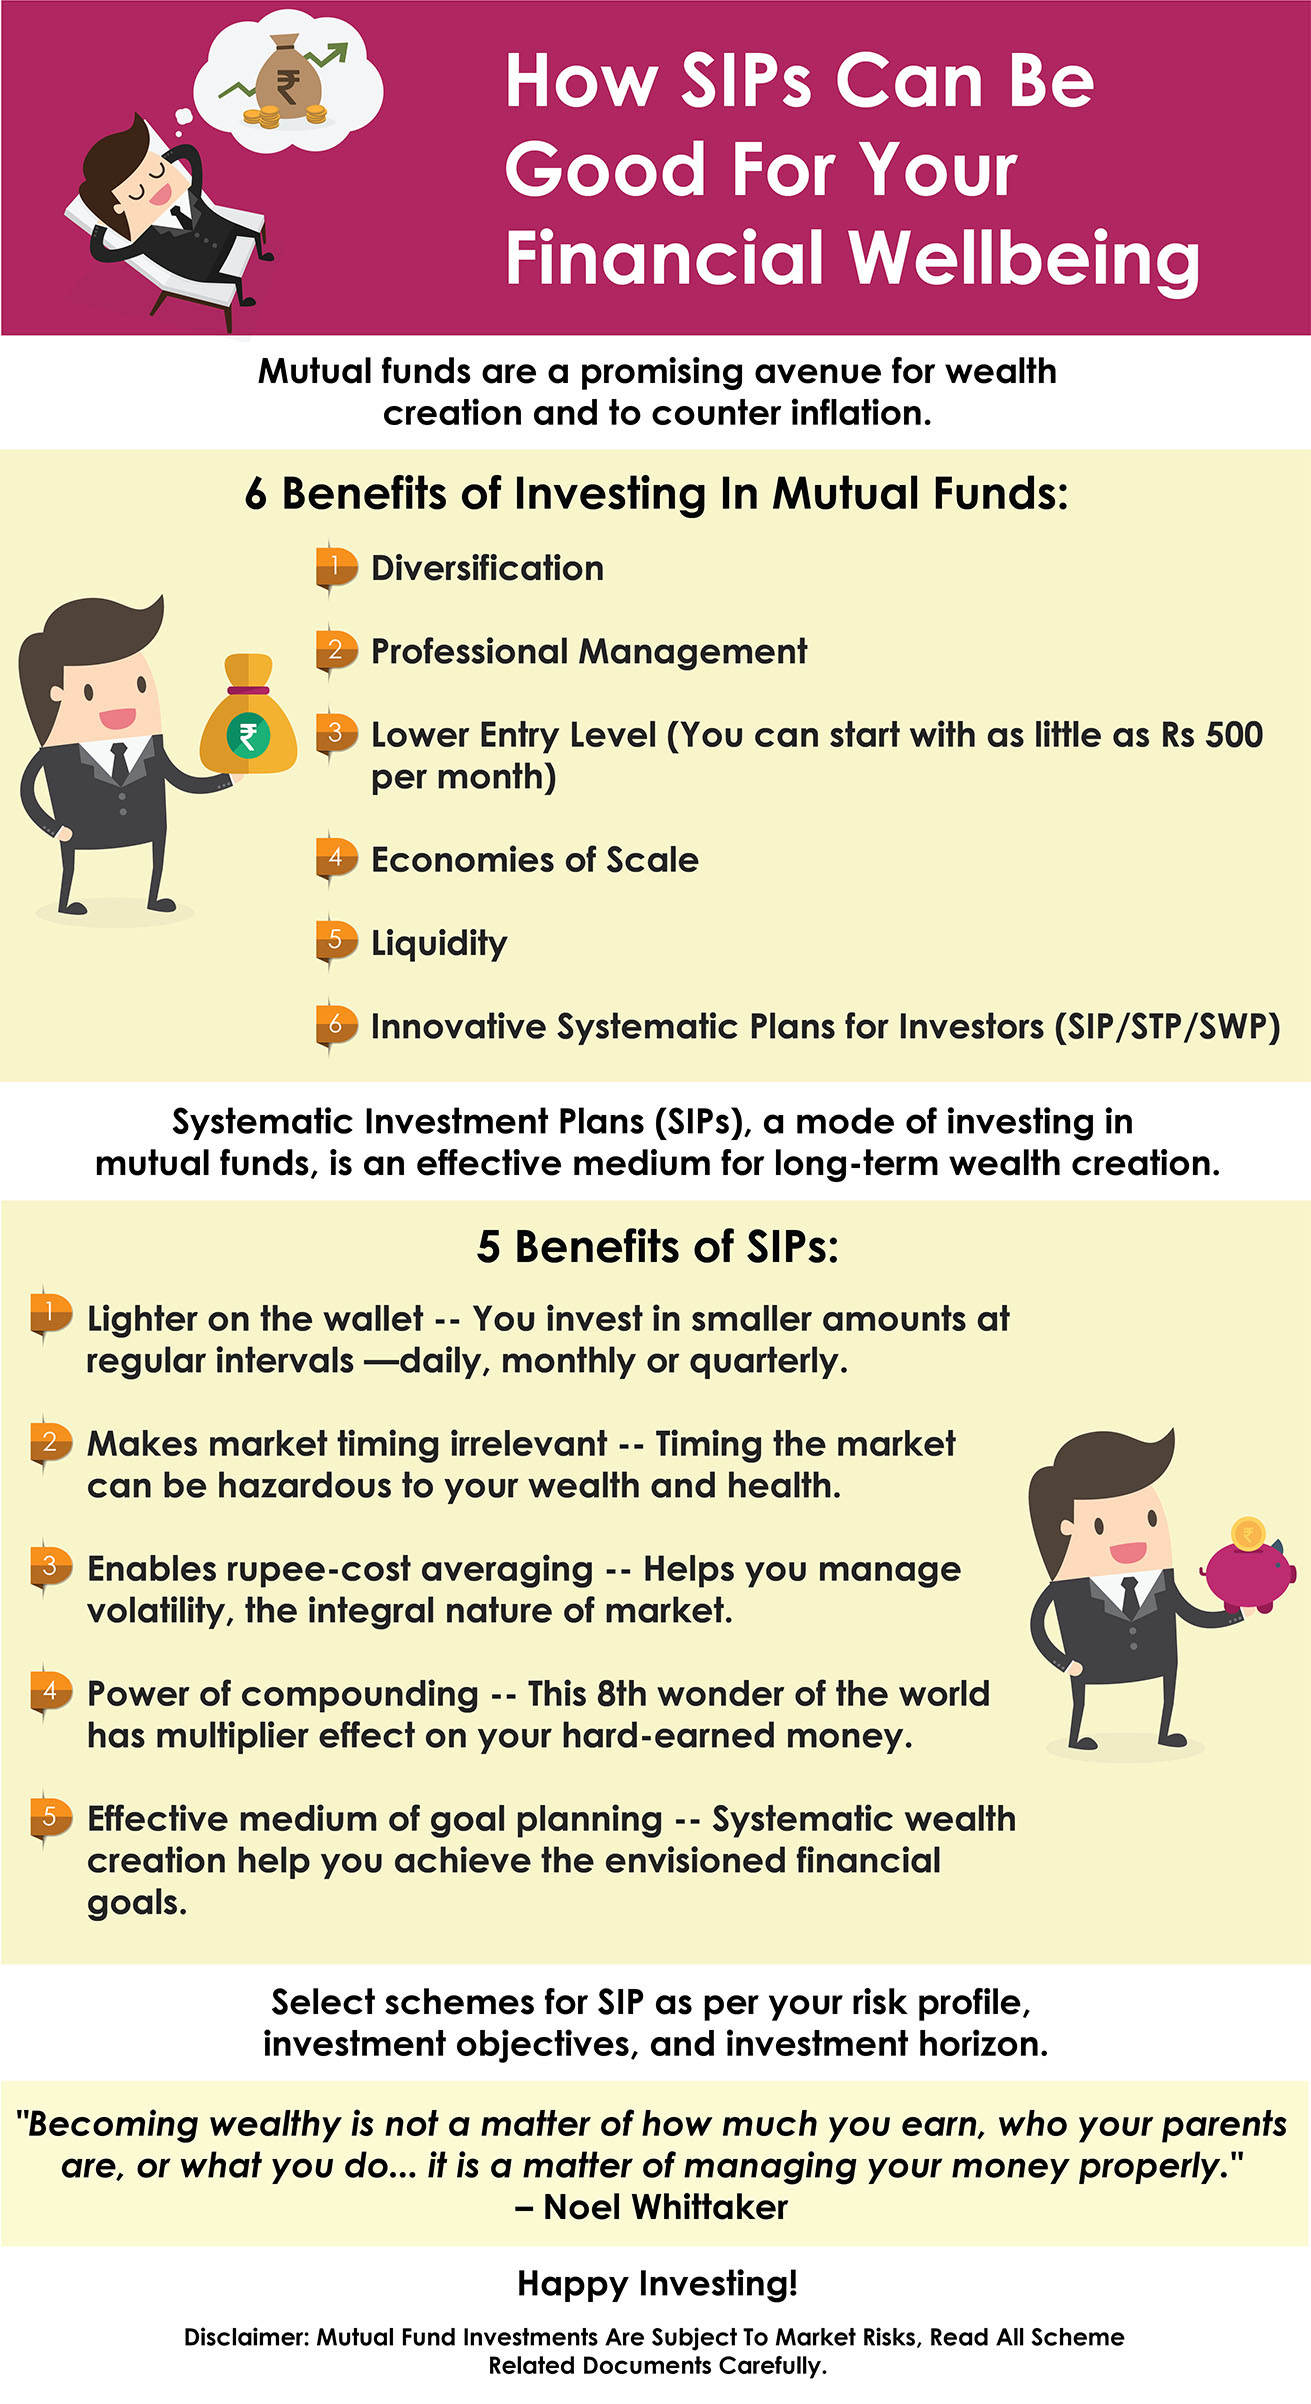 Axis Bank - How SIPs Can Be Good For Your Financial Wellbeing